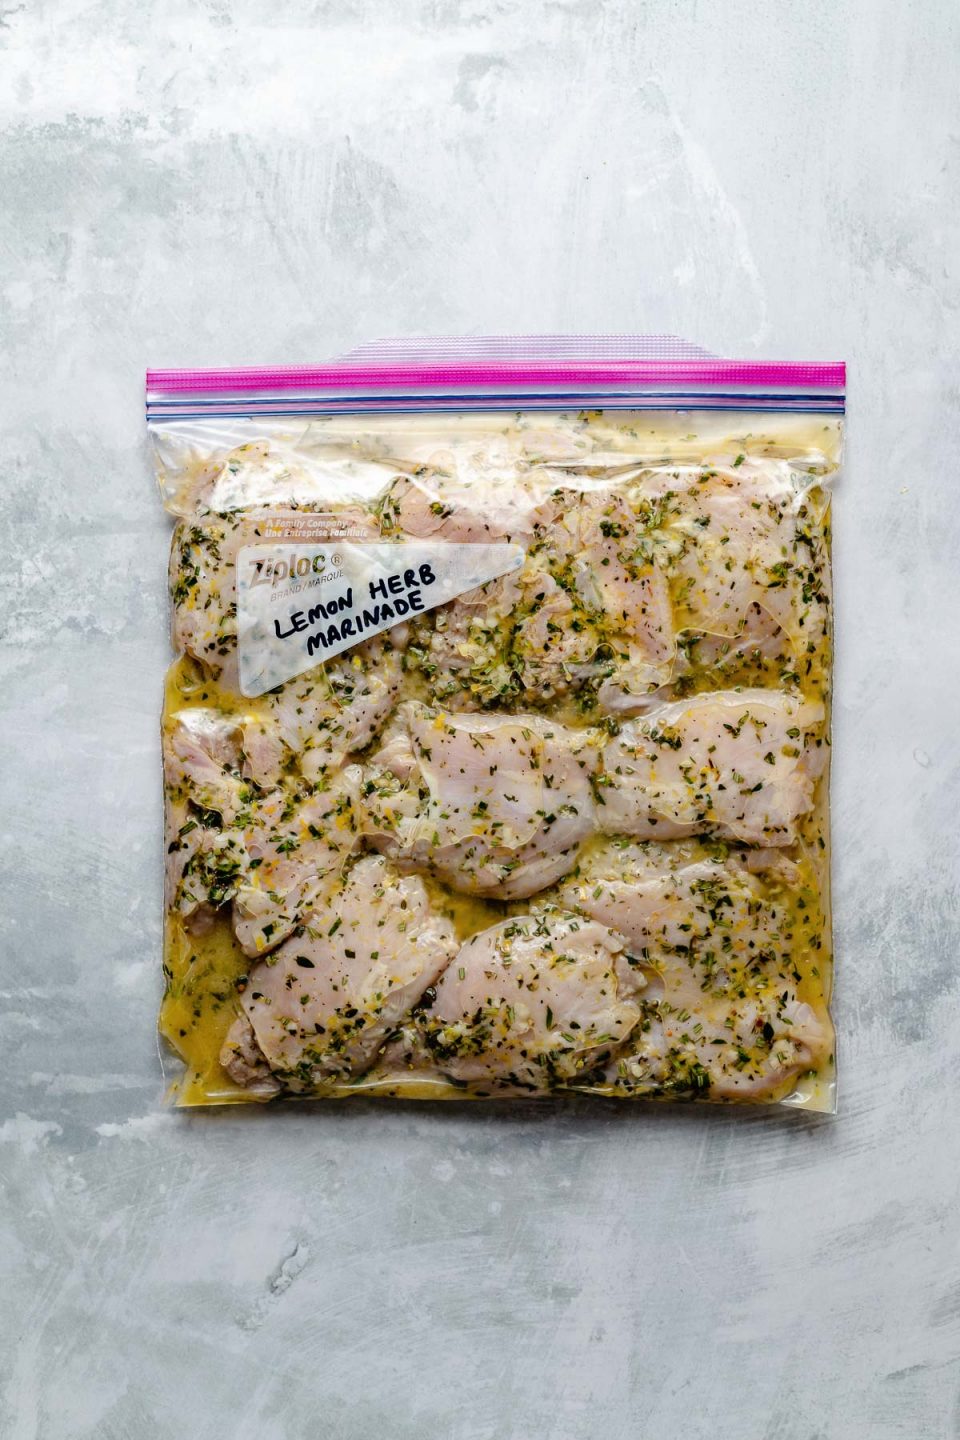 Chicken thighs in a Ziploc bag, marinating in Simple Lemon Herb marinade. The bag sits atop a light blue surface. “Lemon Herb Marinade" is penned in the bag's memo area.